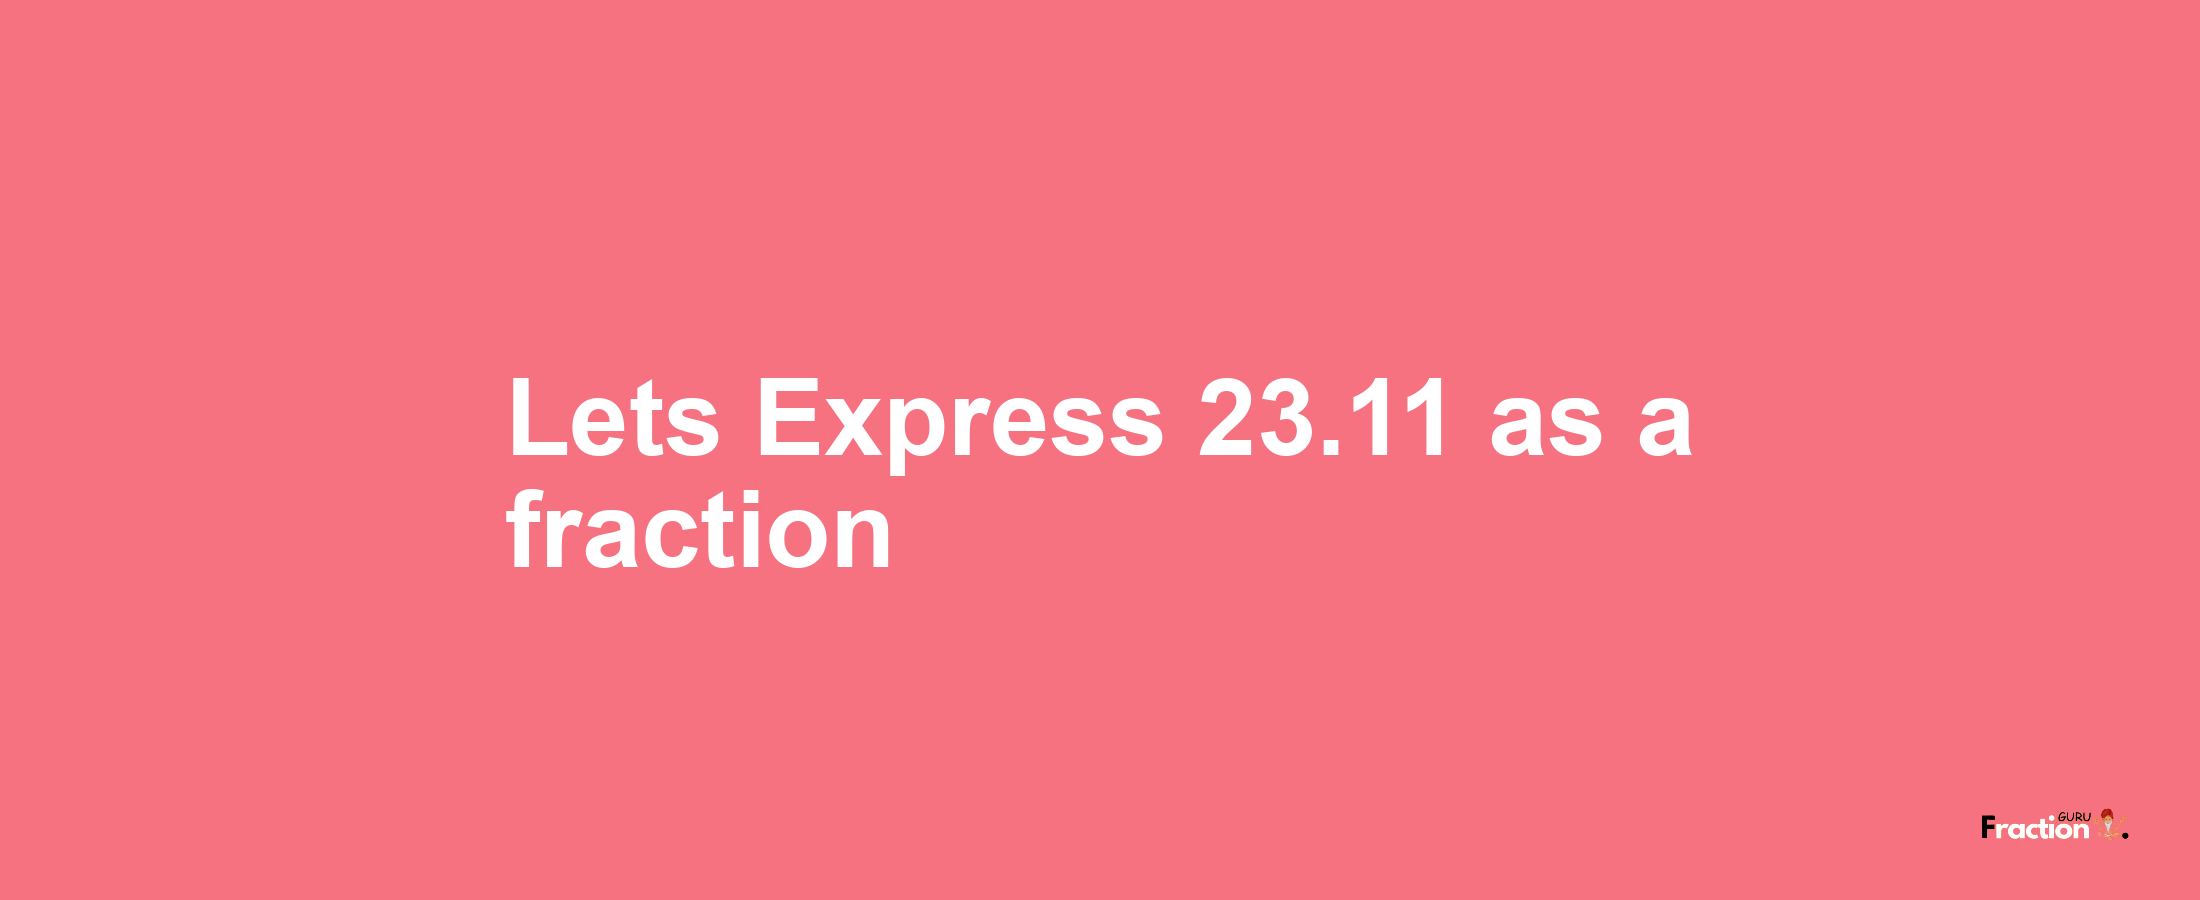 Lets Express 23.11 as afraction